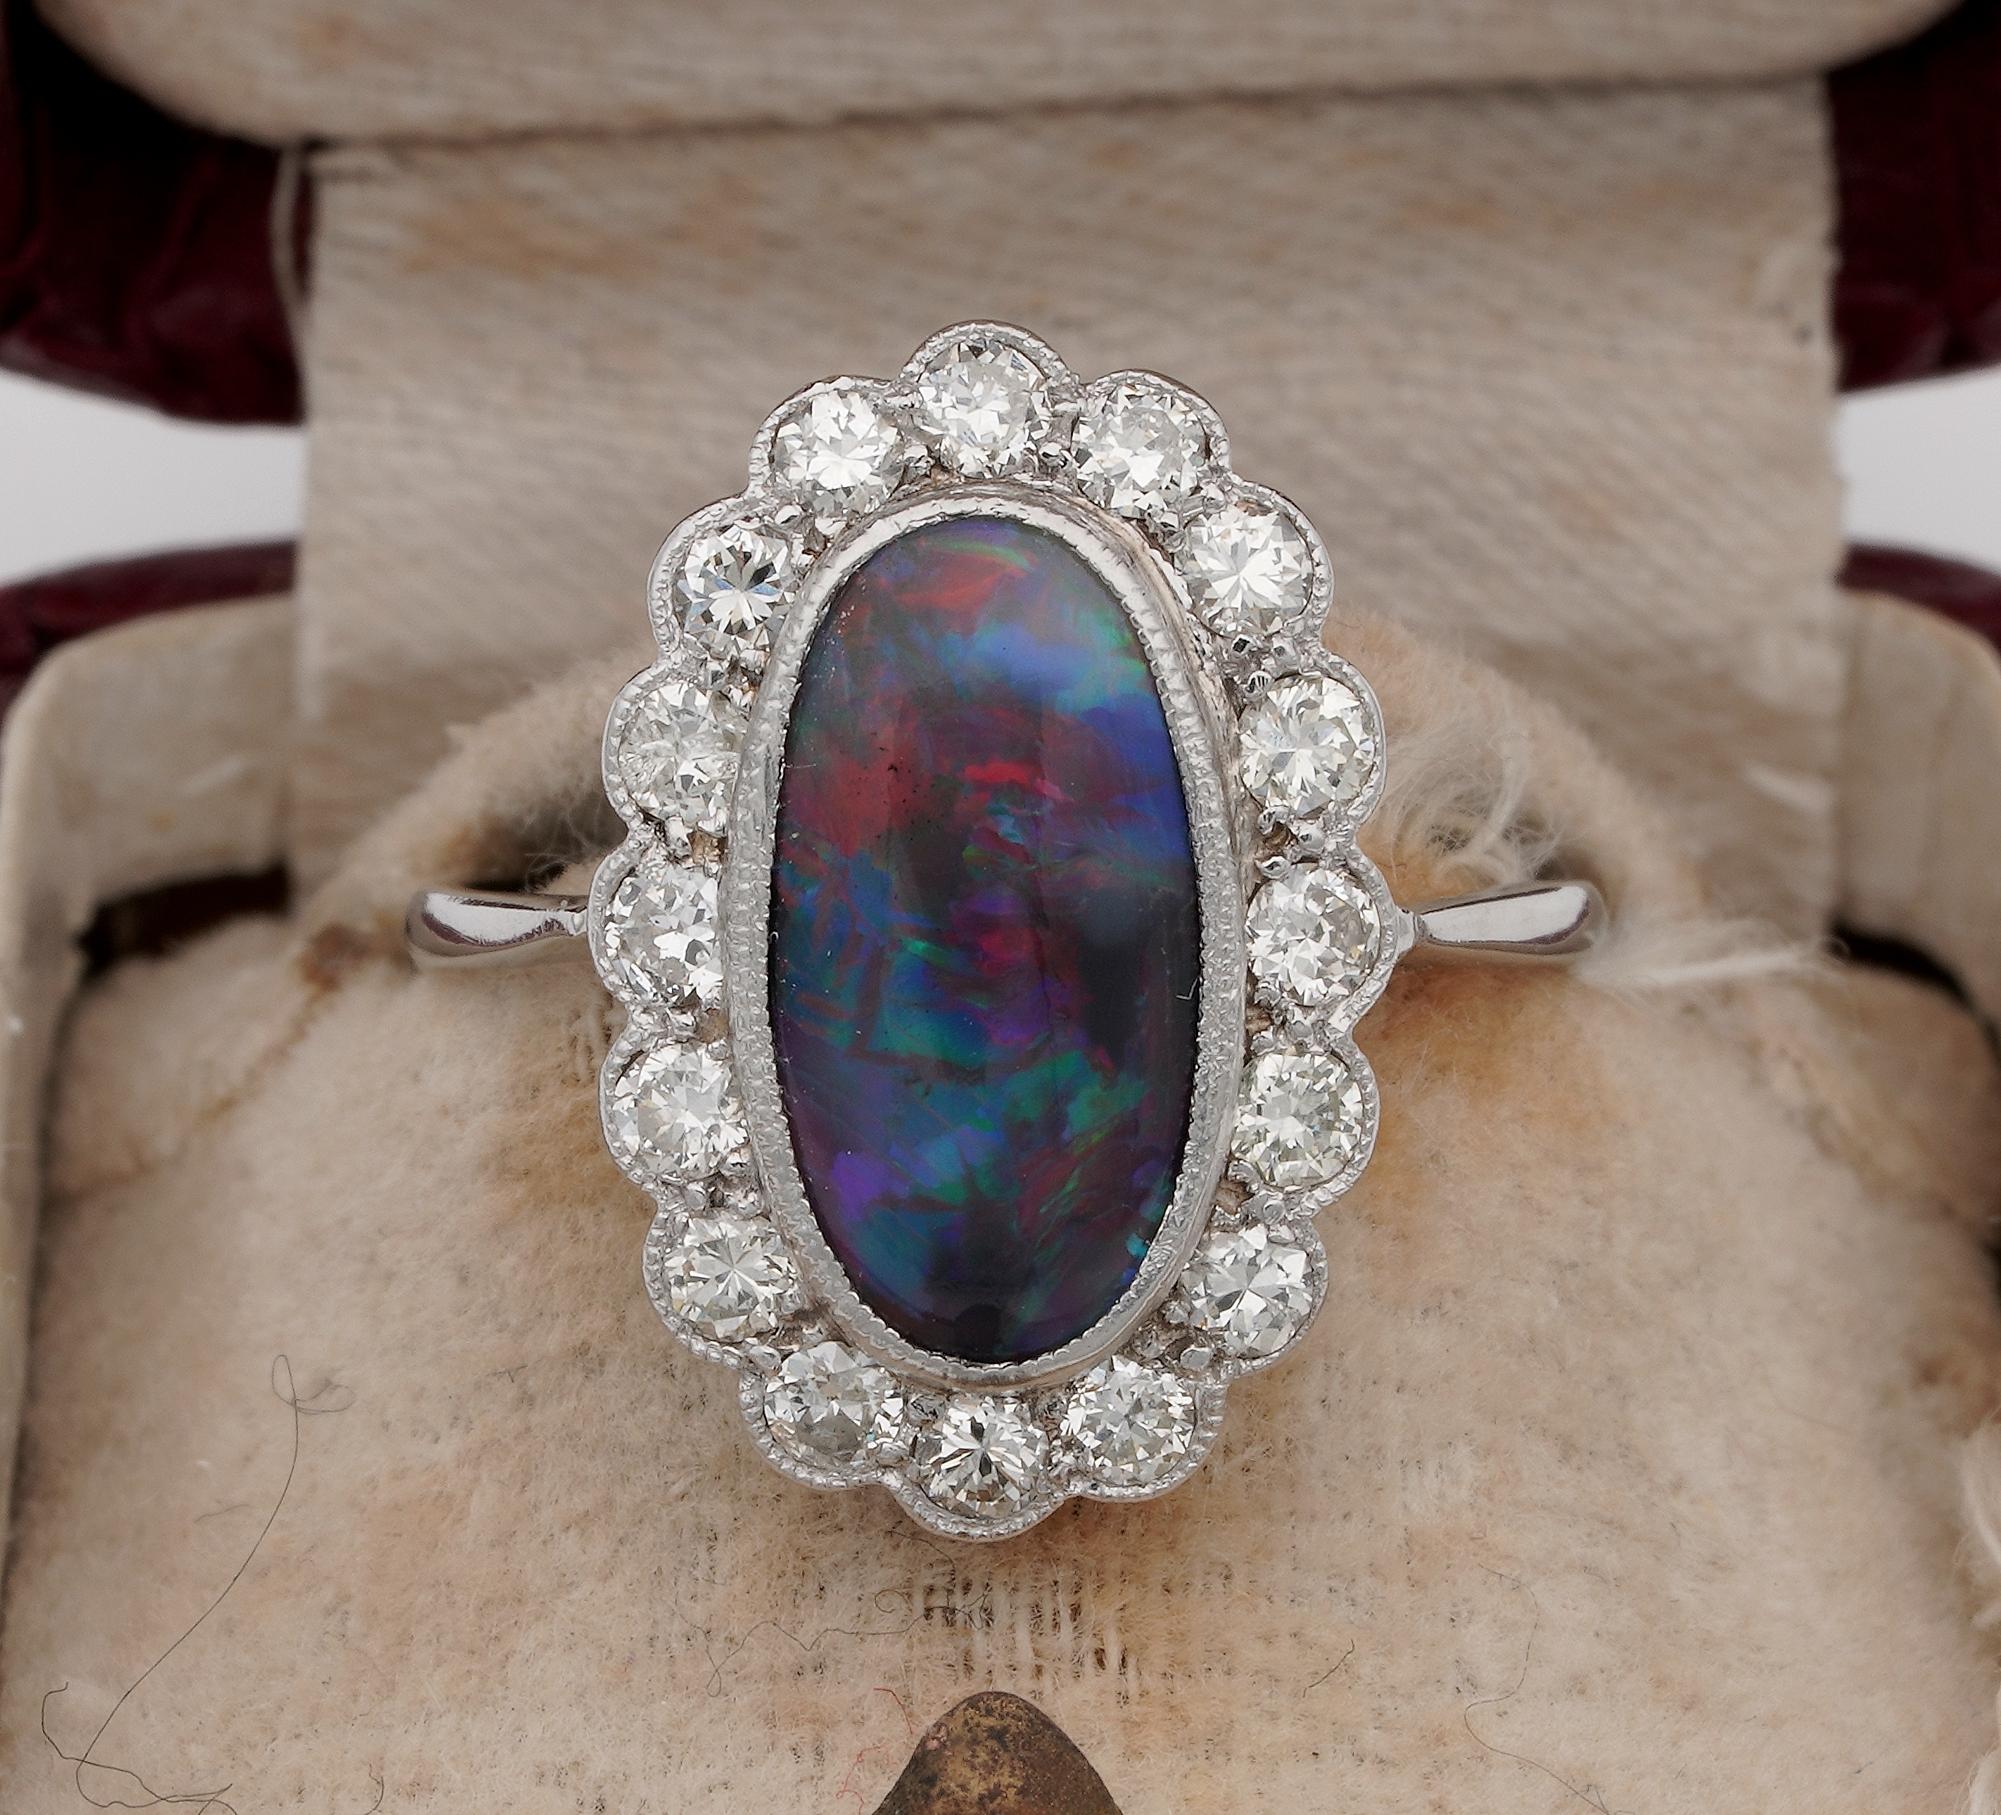 The Rarity Corner

Sensational antique Edwardian period Diamond and Black Opal engagement ring
Hand crafted of solid Platinum bearing assay mark, 1915/20 ca
Centrally set with an amazing Australian solid Black Opal, holding a rich colours palette as